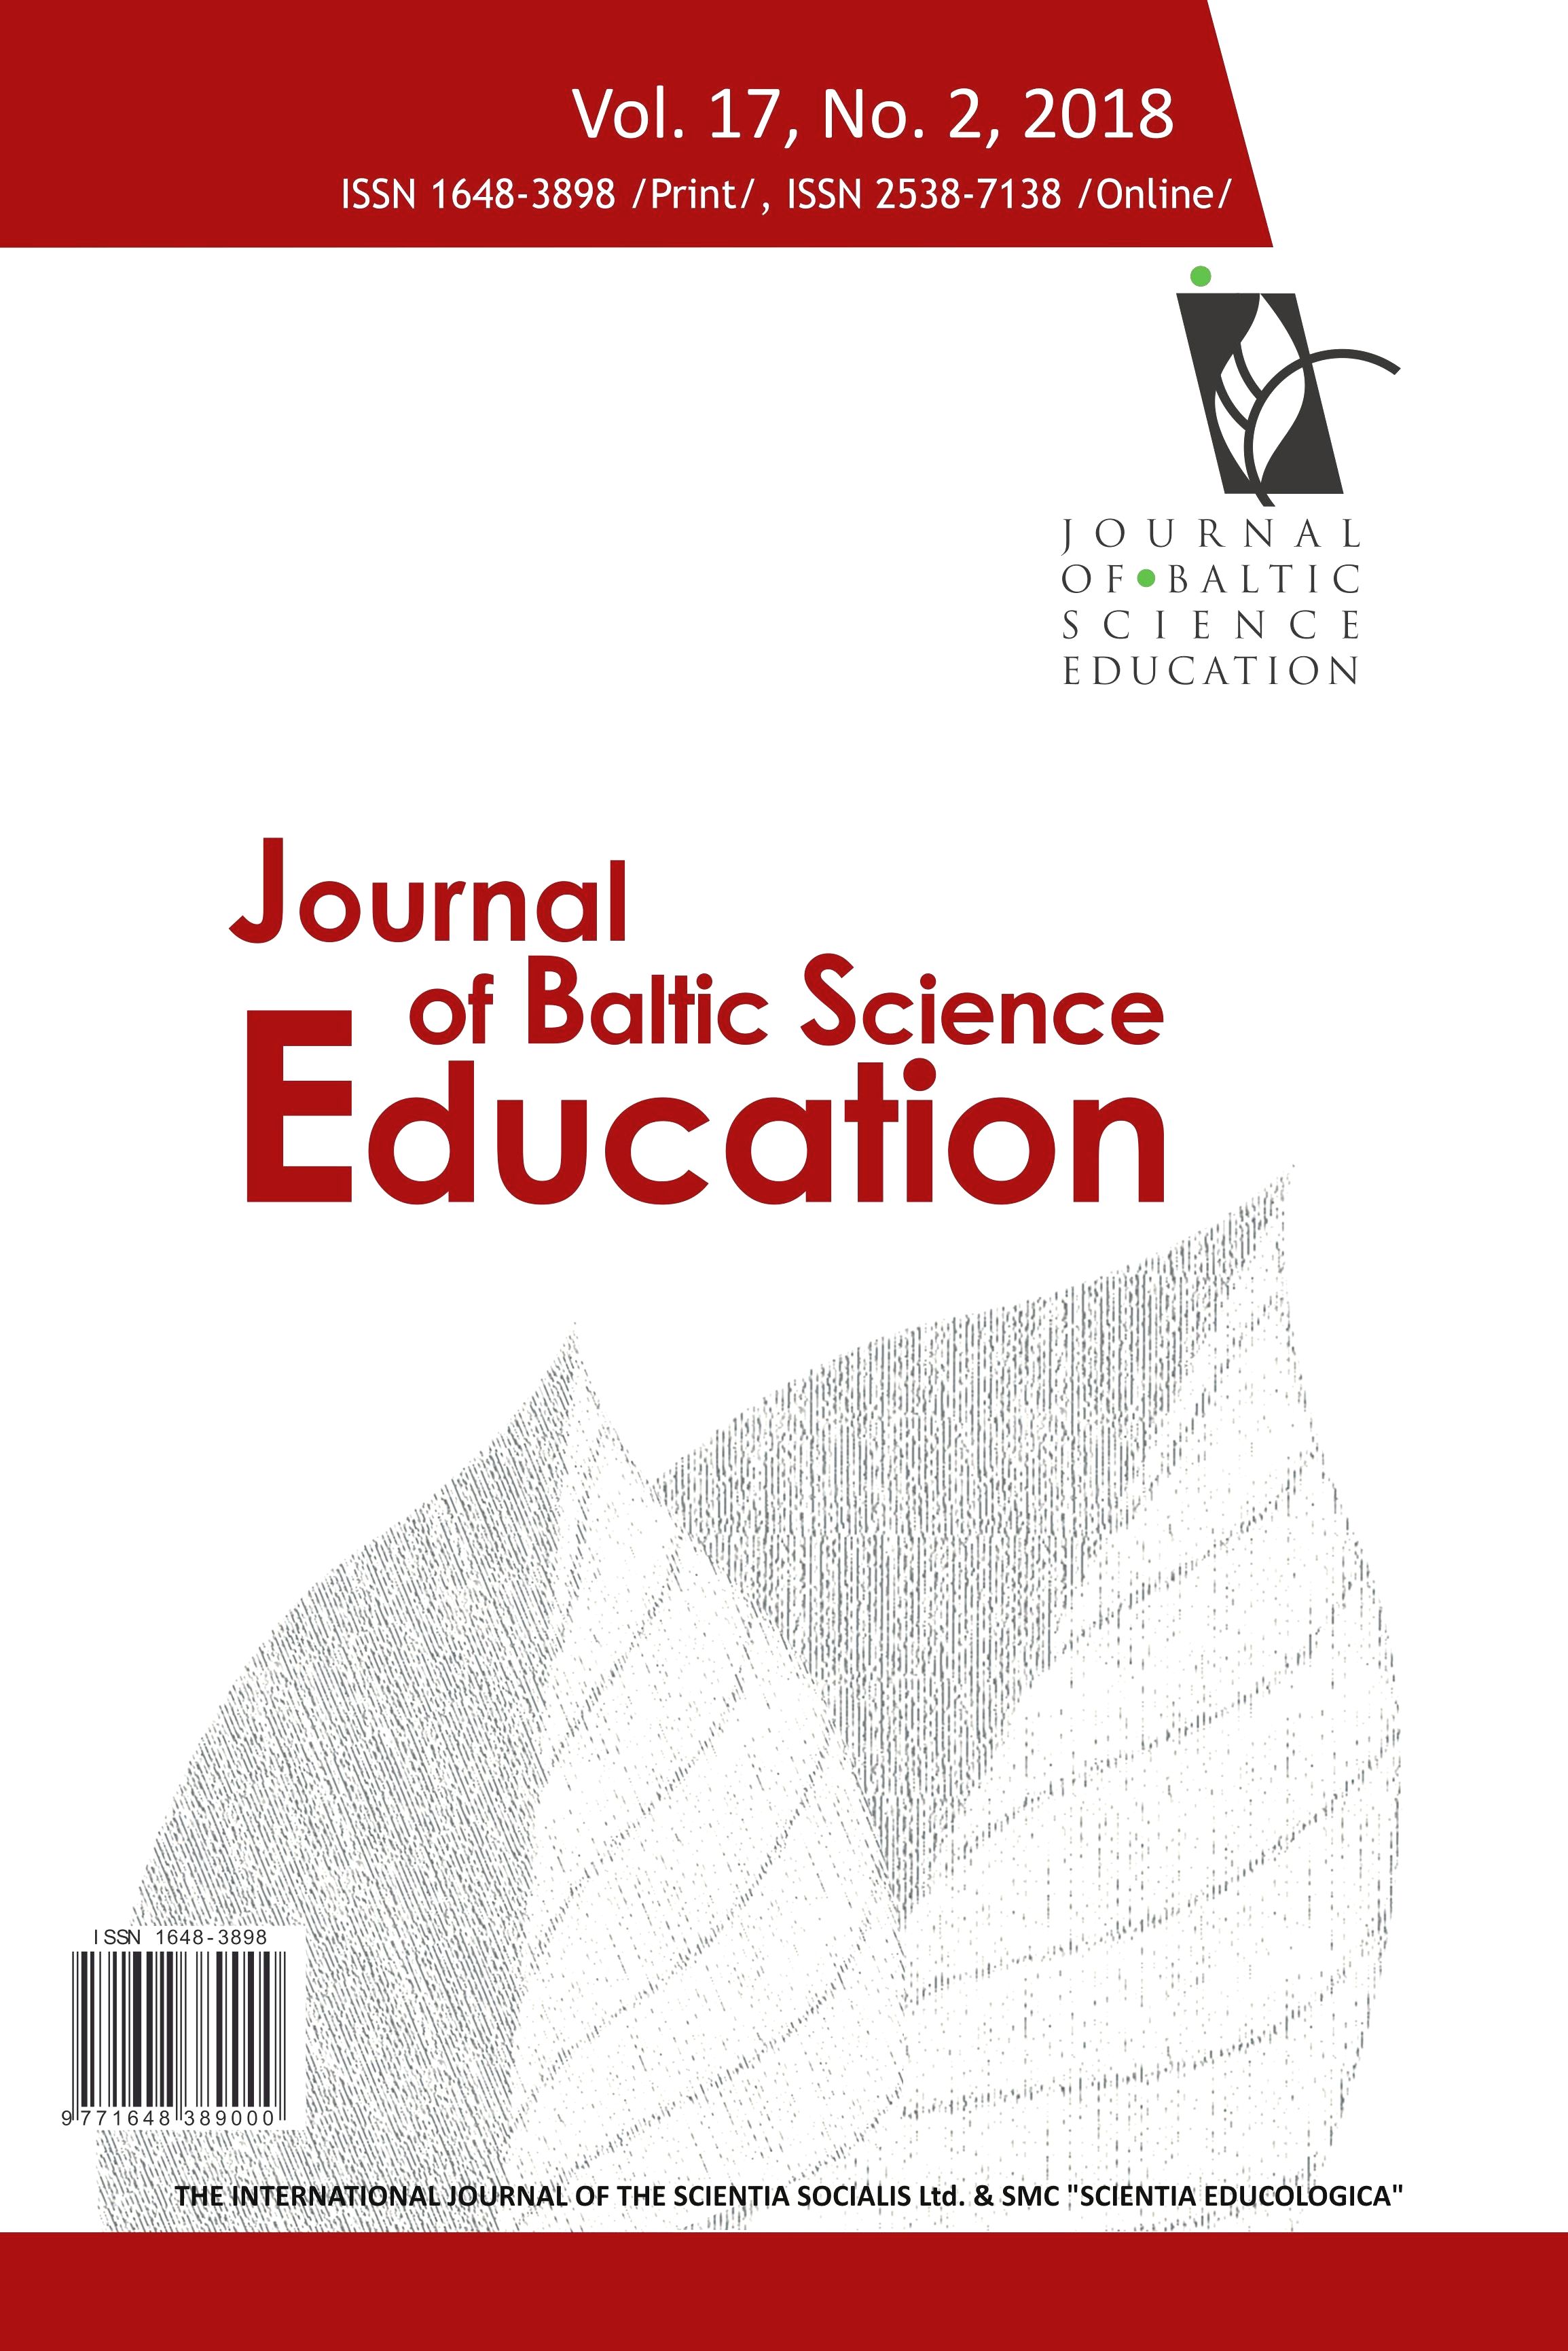 THE COMPARISON OF OR-IPA TEACHING MODEL AND PROBLEM BASED LEARNING MODEL EFFECTIVENESS TO IMPROVE CRITICAL THINKING SKILLS OF PRE-SERVICE PHYSICS TEACHERS